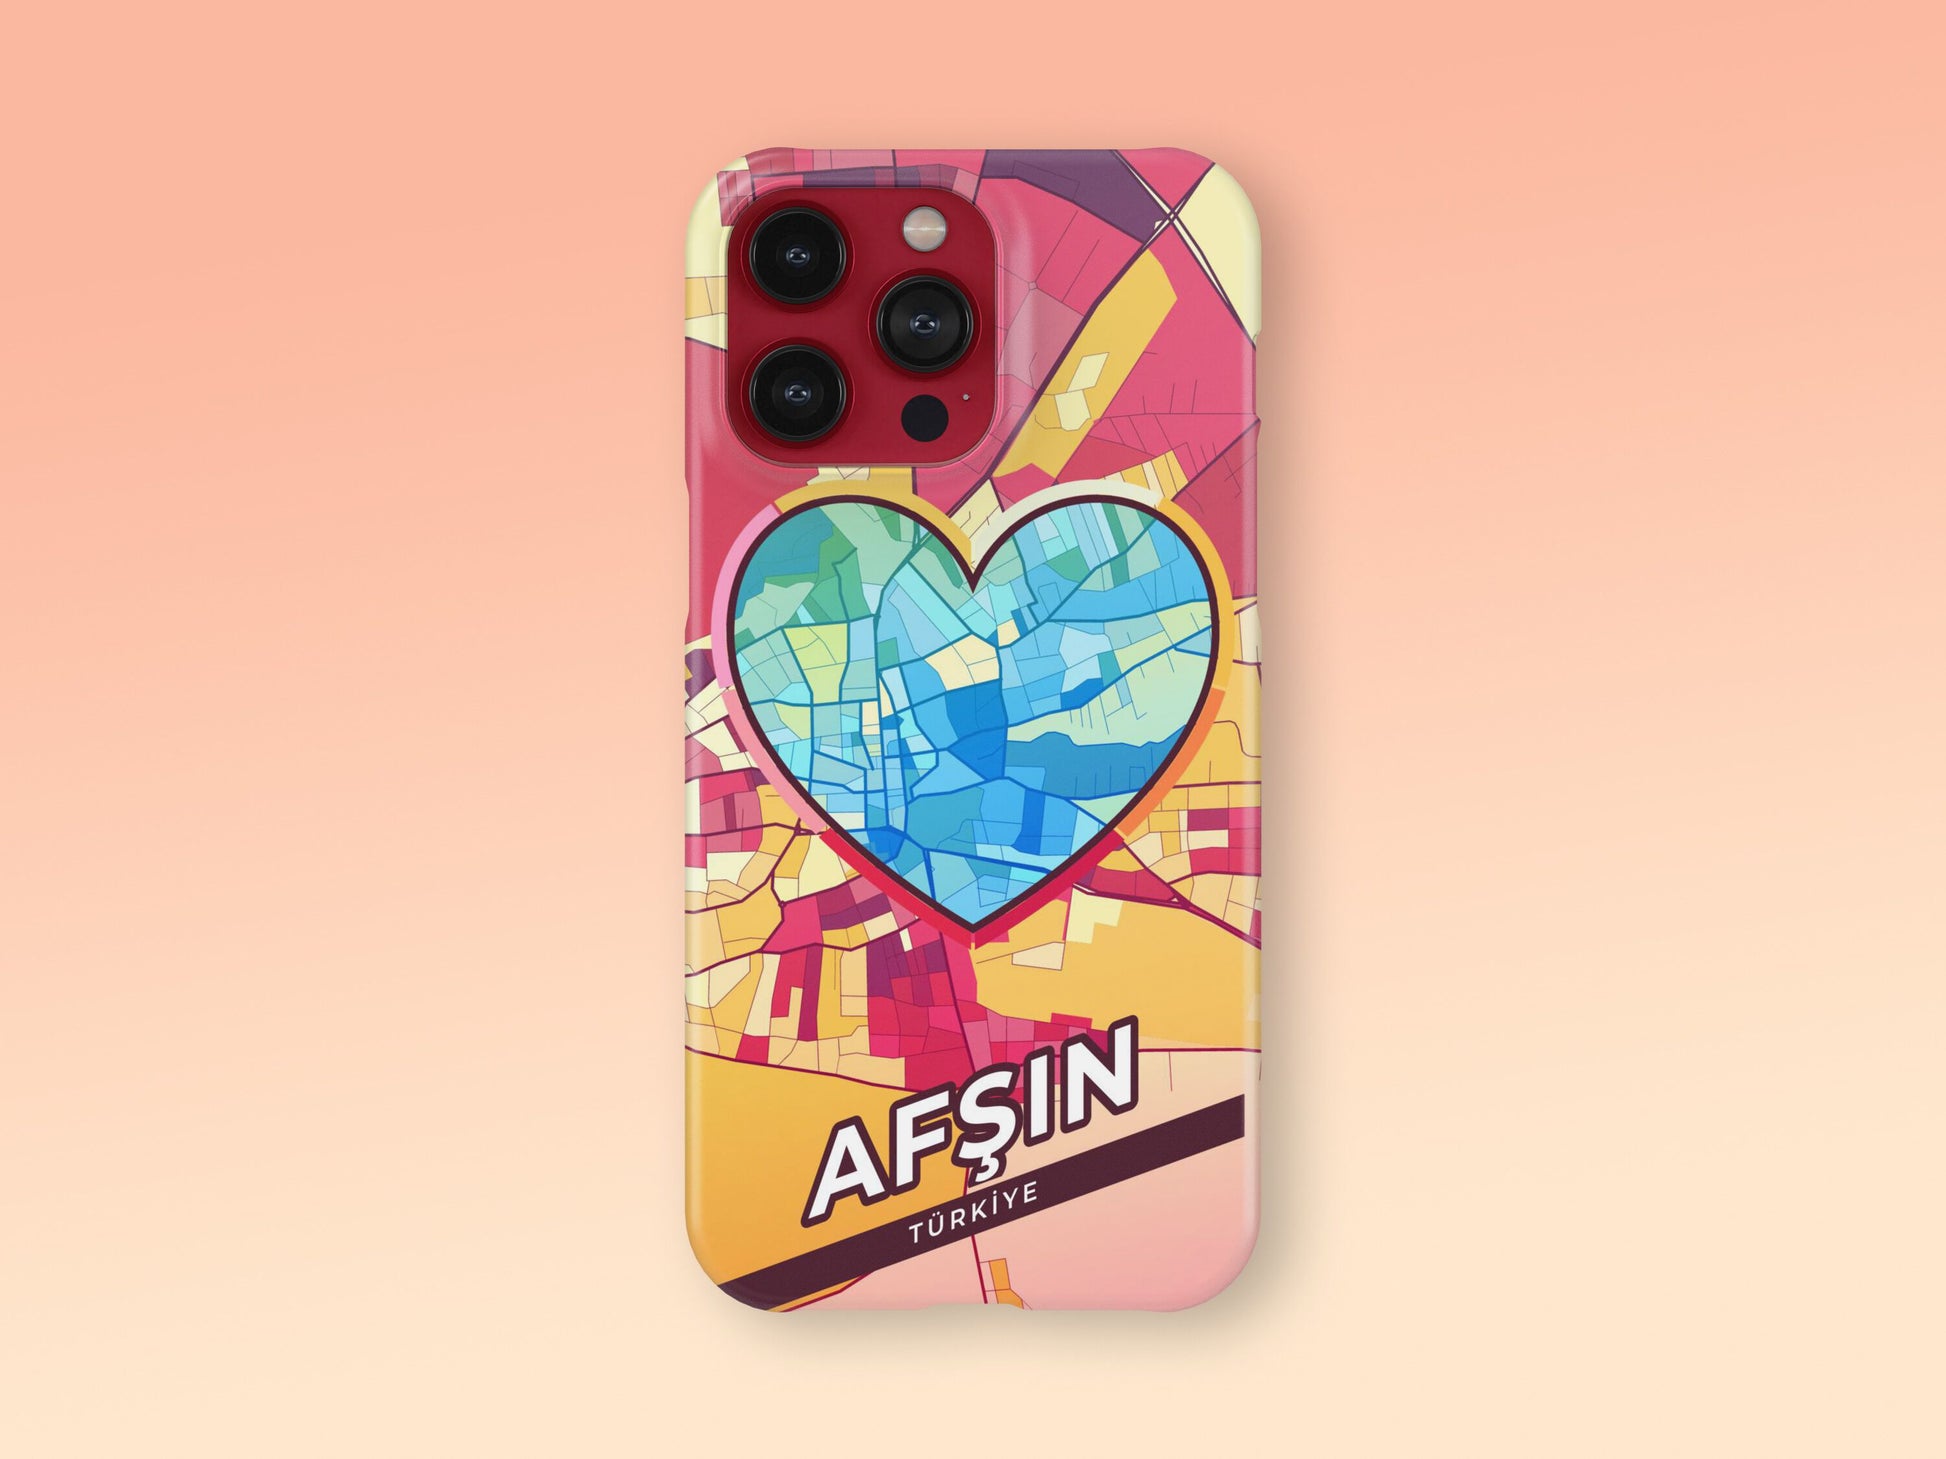 Afşin Turkey slim phone case with colorful icon. Birthday, wedding or housewarming gift. Couple match cases. 2